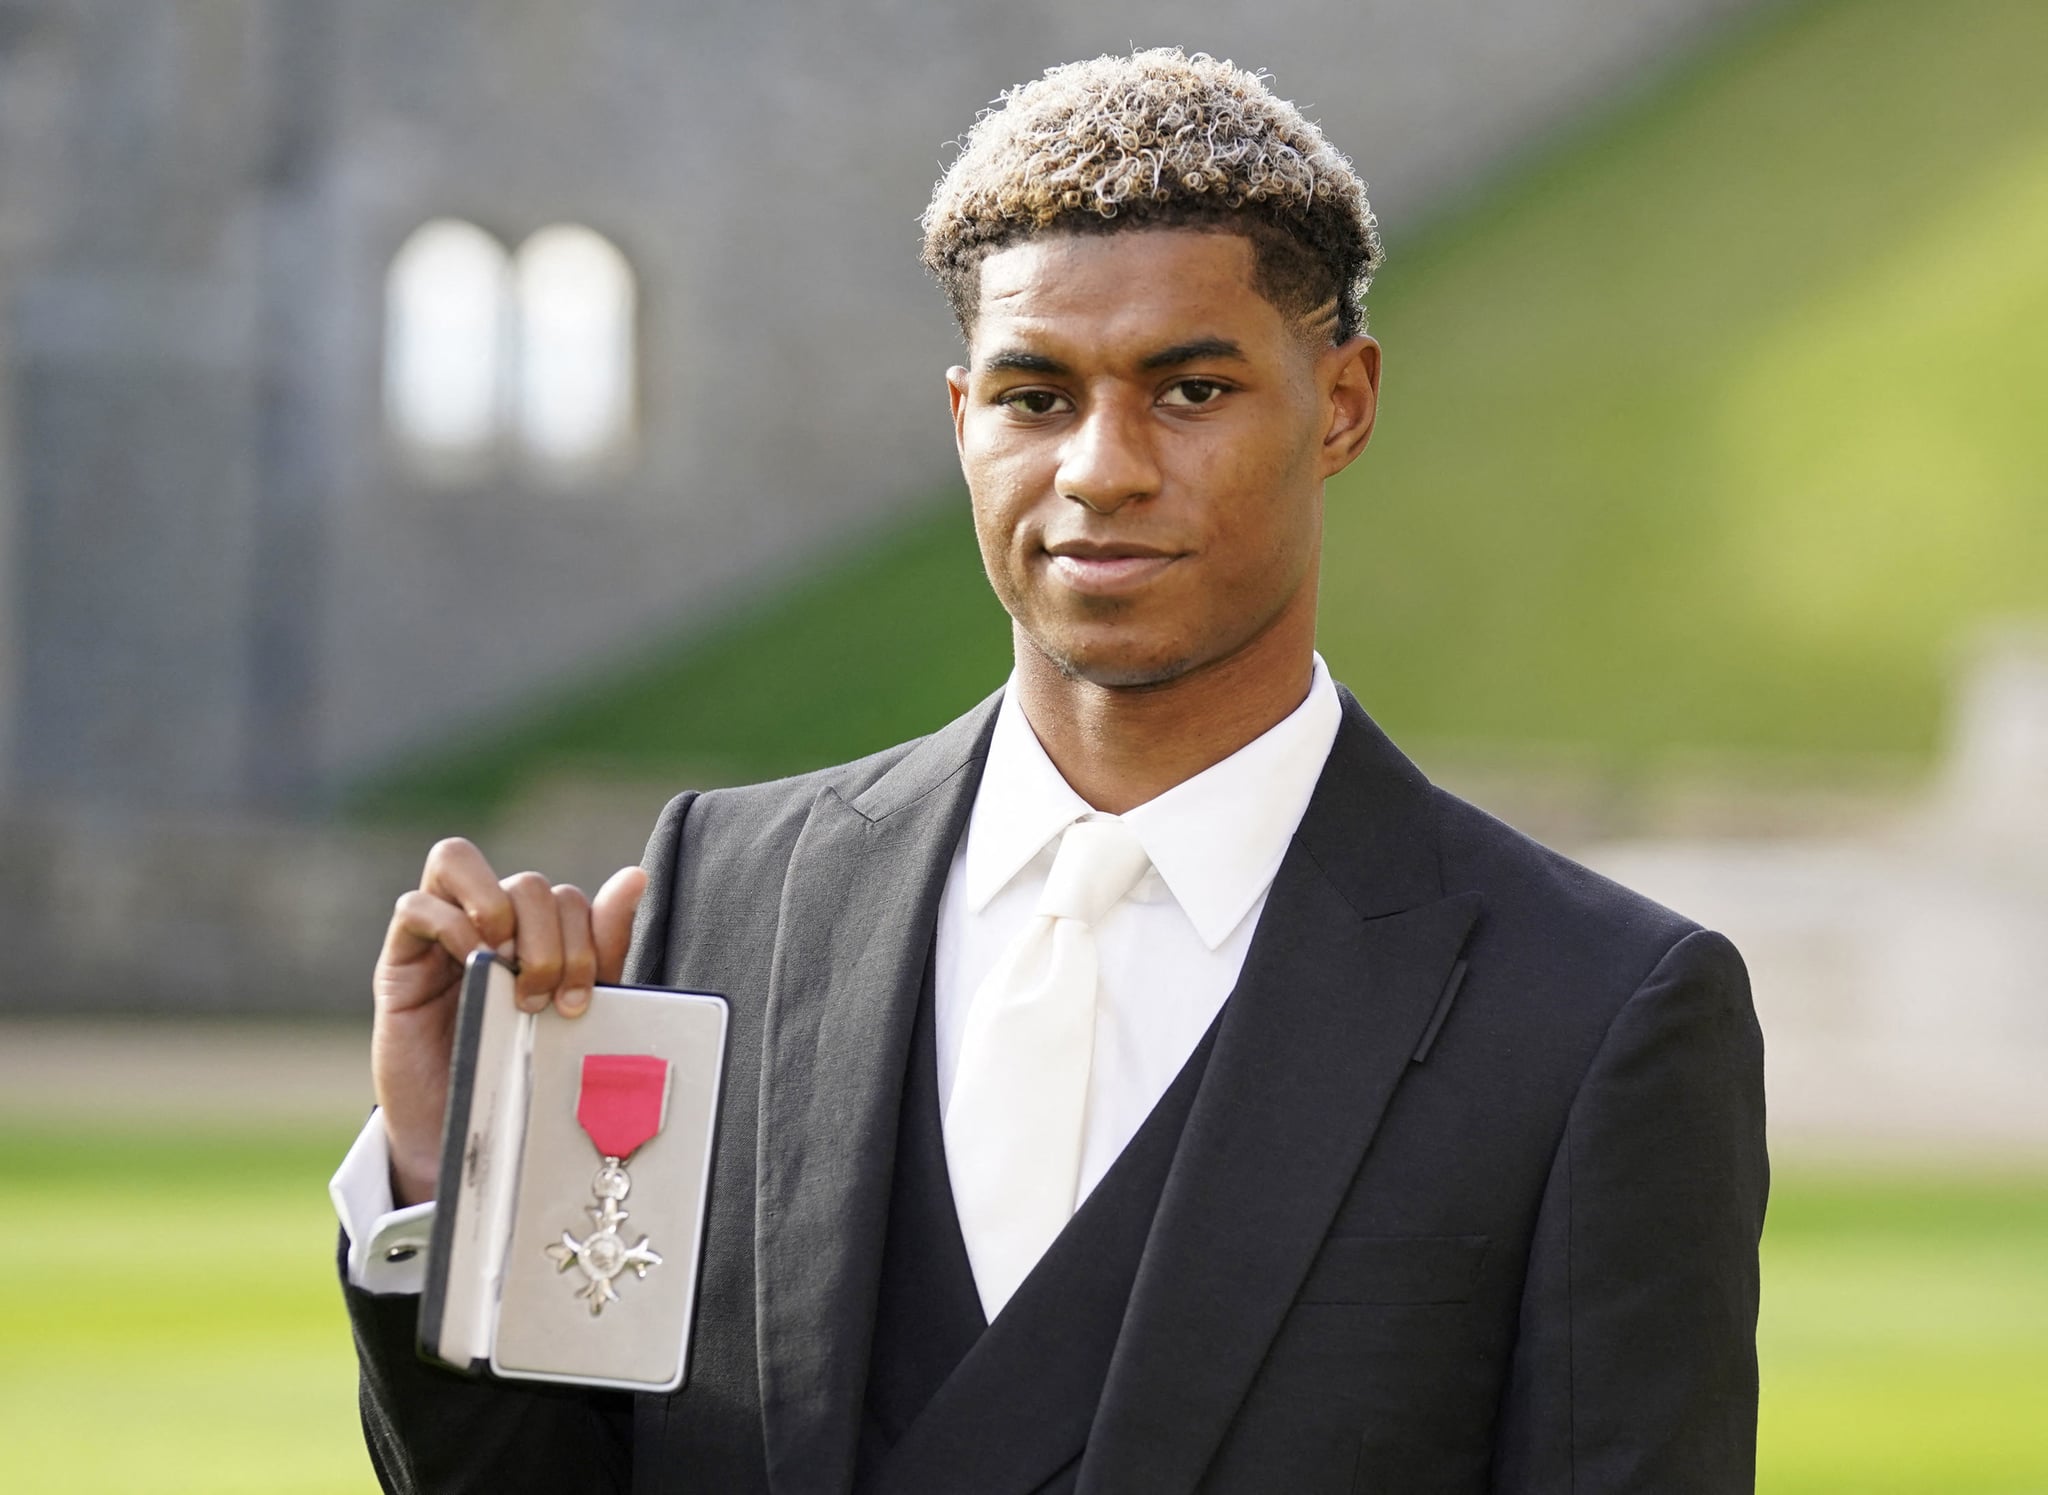 Manchester United and England footballer Marcus Rashford poses with his medal after being appointed a Member of the Order of the British Empire (MBE) for services to Vulnerable Children in the UK during the Covid-19 pandemic, following an investiture ceremony at Windsor Castle in Windsor, west of London on November 9, 2021. (Photo by Andrew Matthews / POOL / AFP) (Photo by ANDREW MATTHEWS/POOL/AFP via Getty Images)